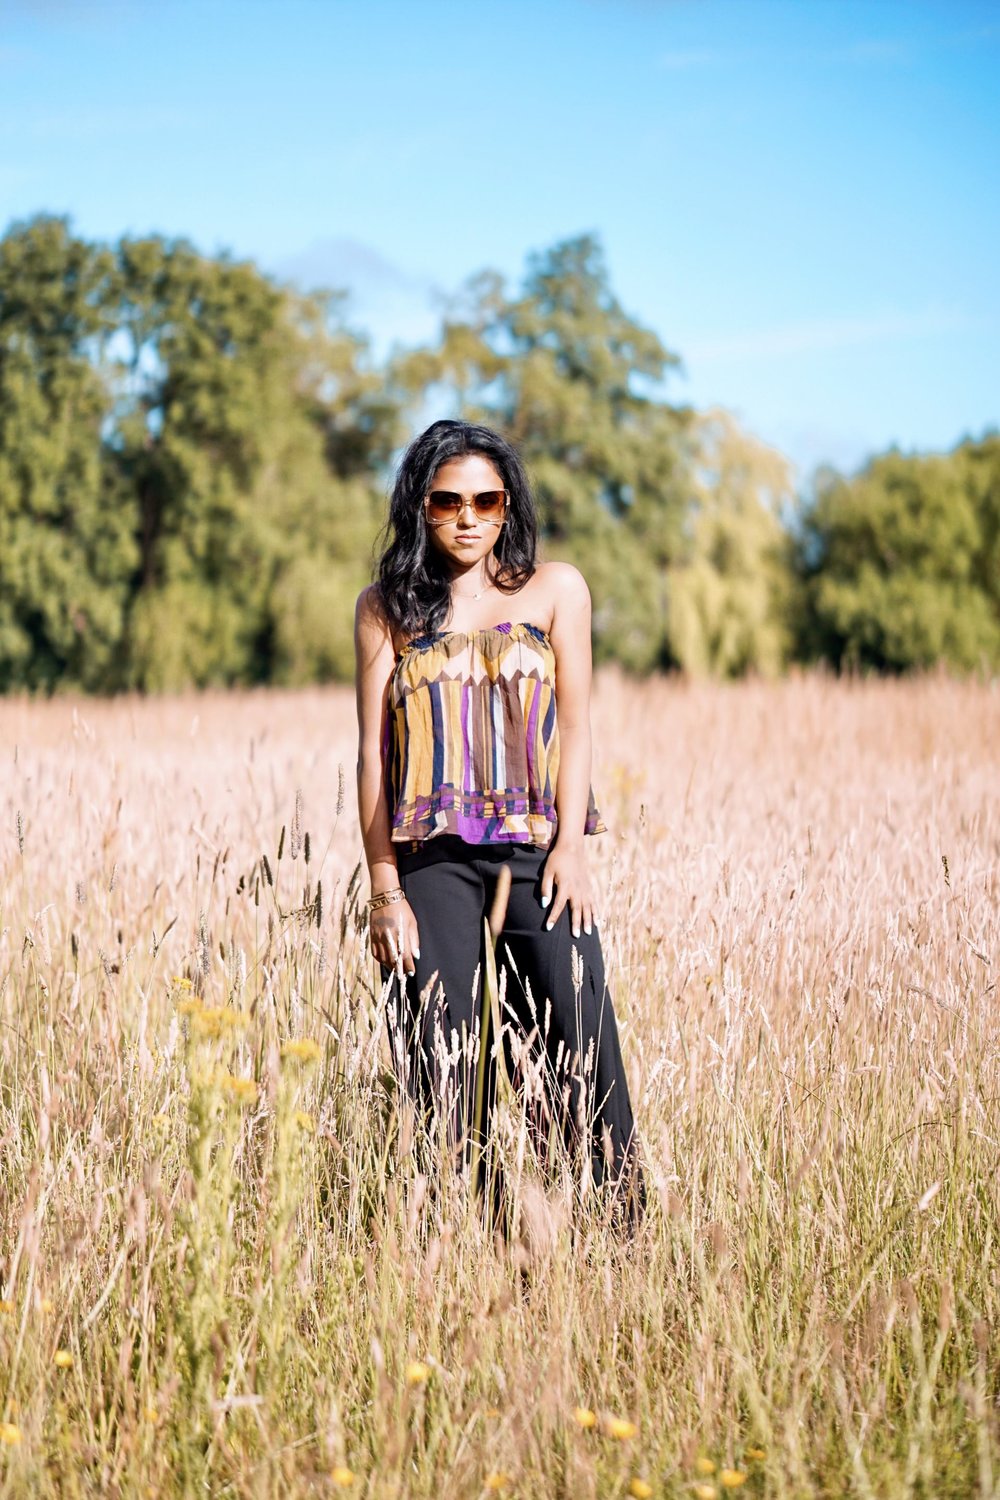 Sachini wearing a Bash dress standing in a field of wheat